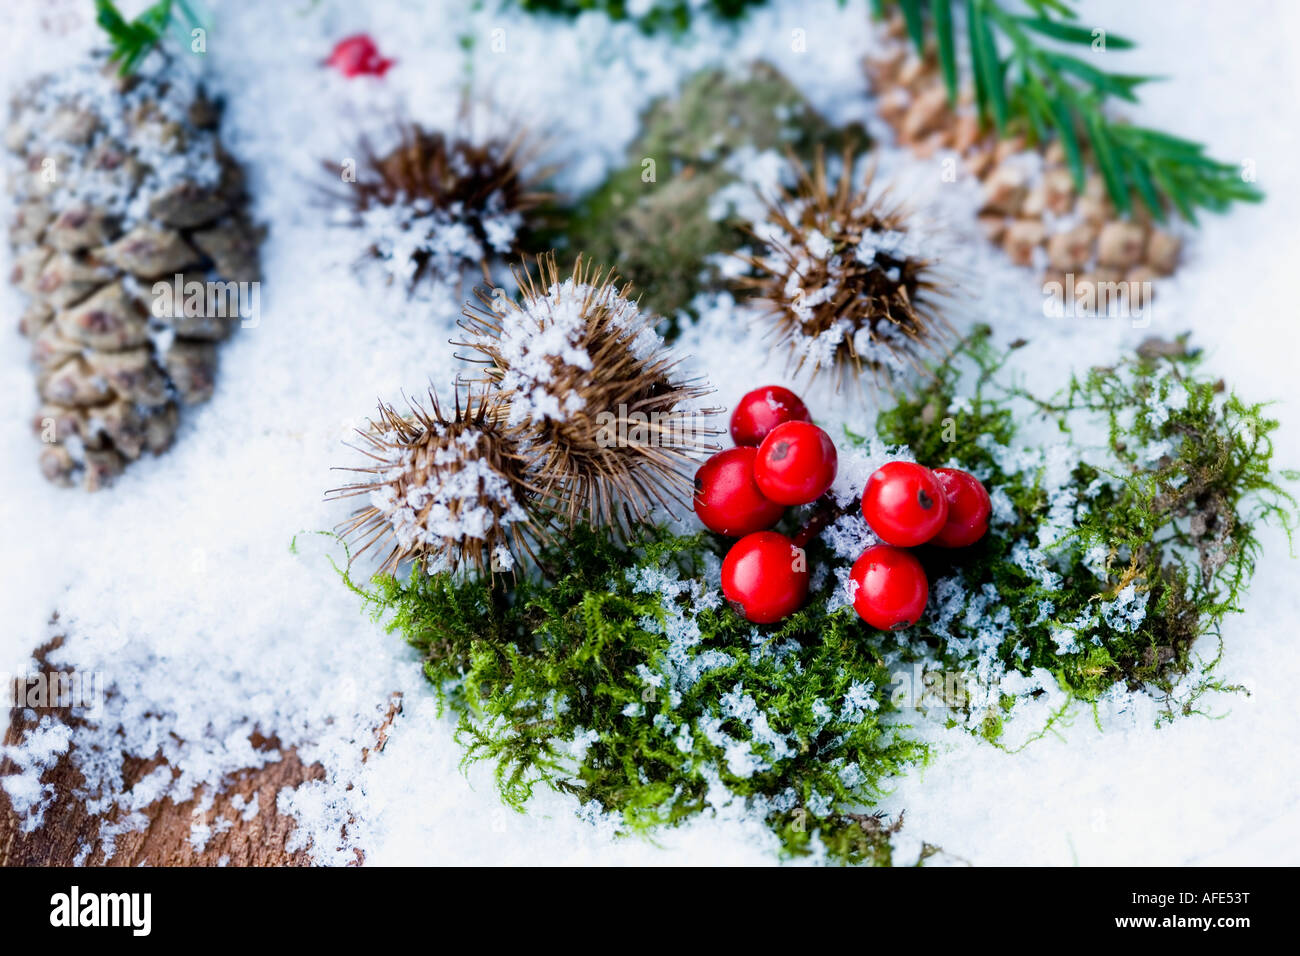 Berries pine cones and moss burried in snow Stock Photo